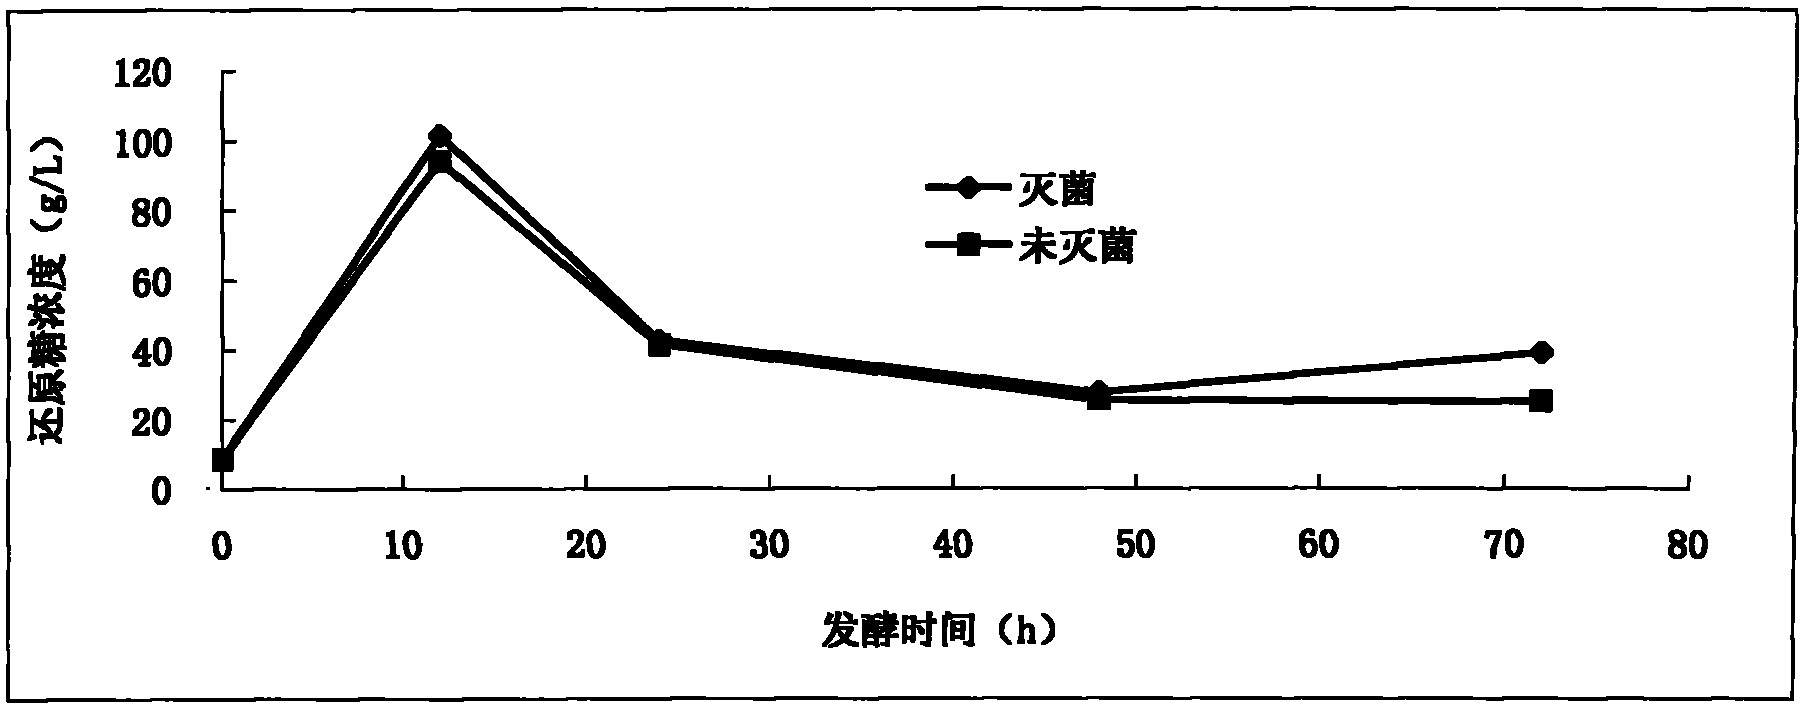 Method for producing fuel ethanol by utilizing papermaking sludge